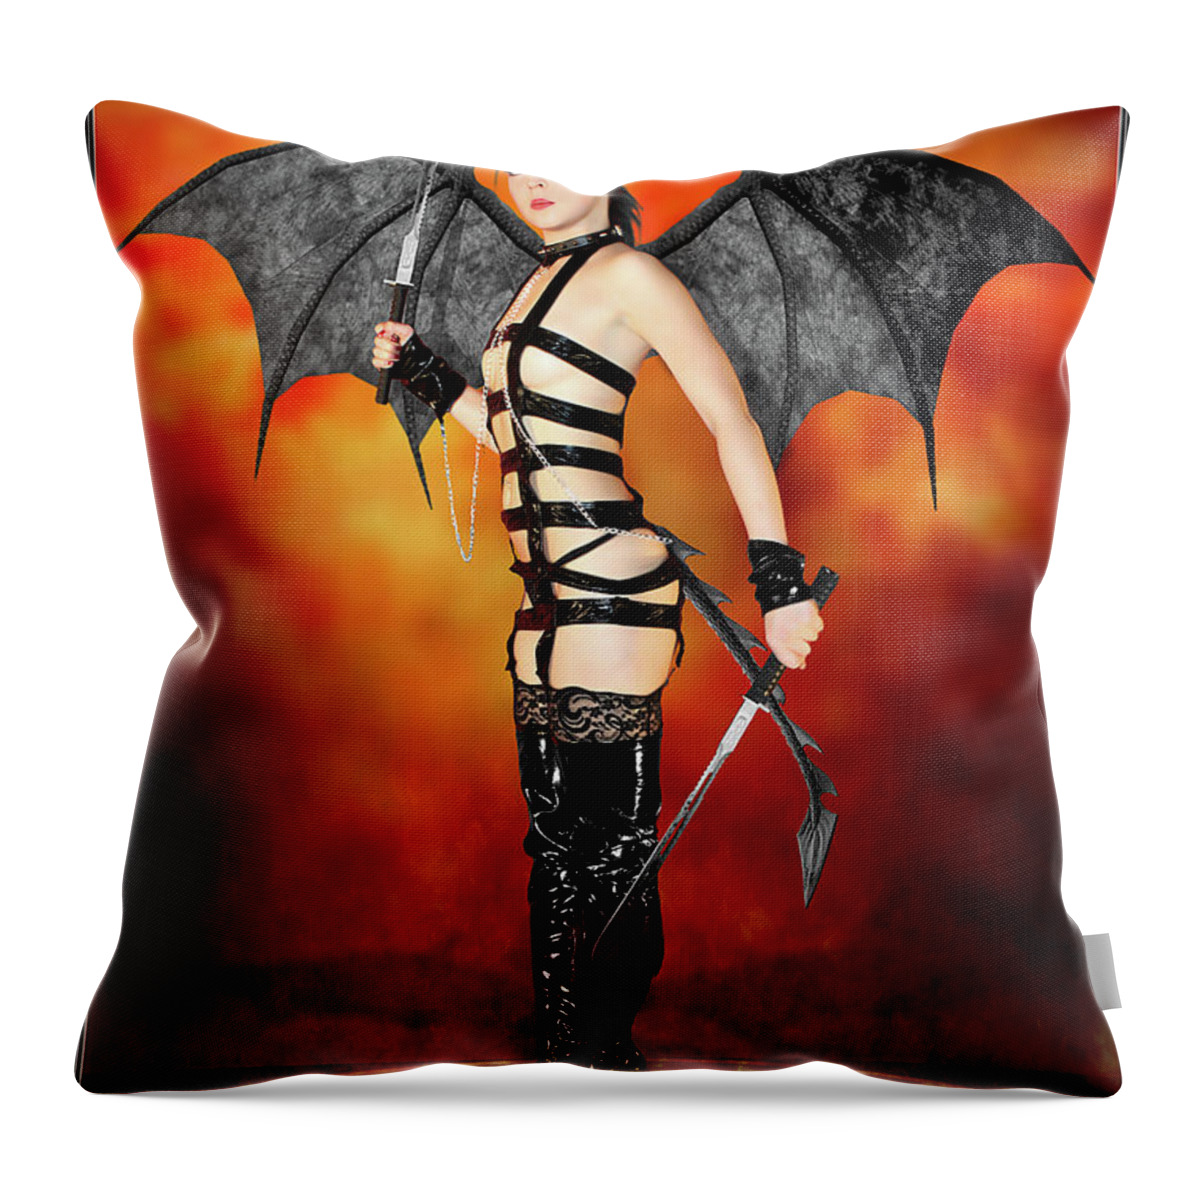 Rebel Throw Pillow featuring the photograph Rebel Succubus by Jon Volden